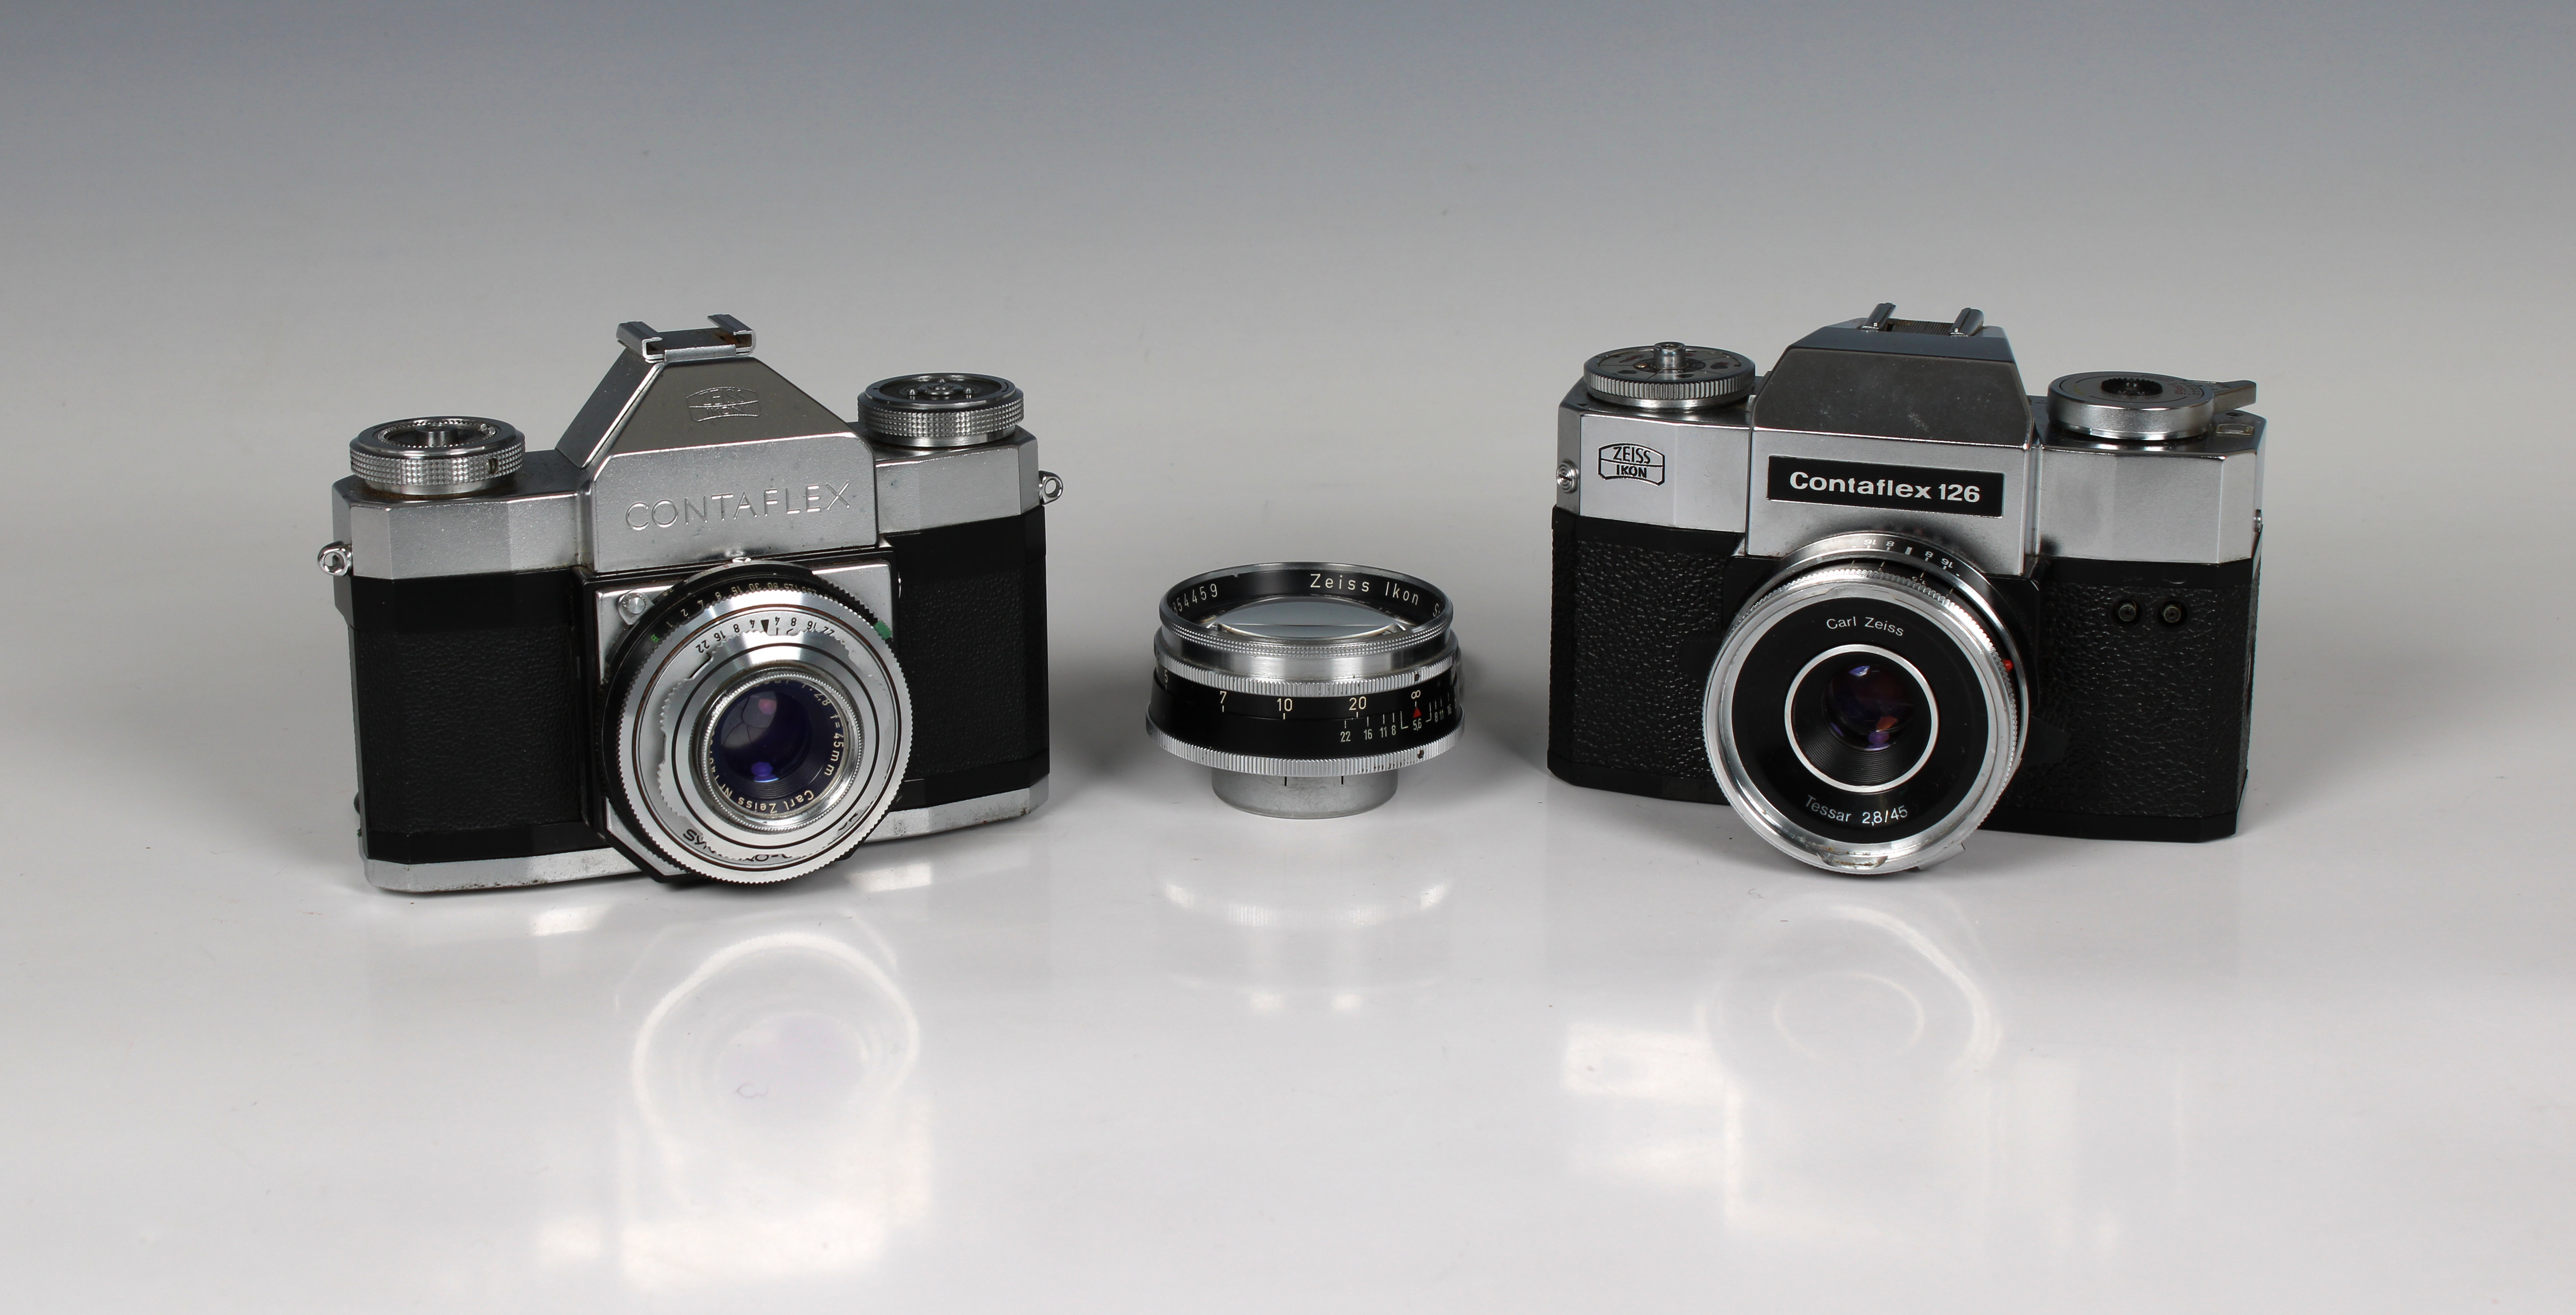 Photography - Zeiss Ikon cameras and accessories